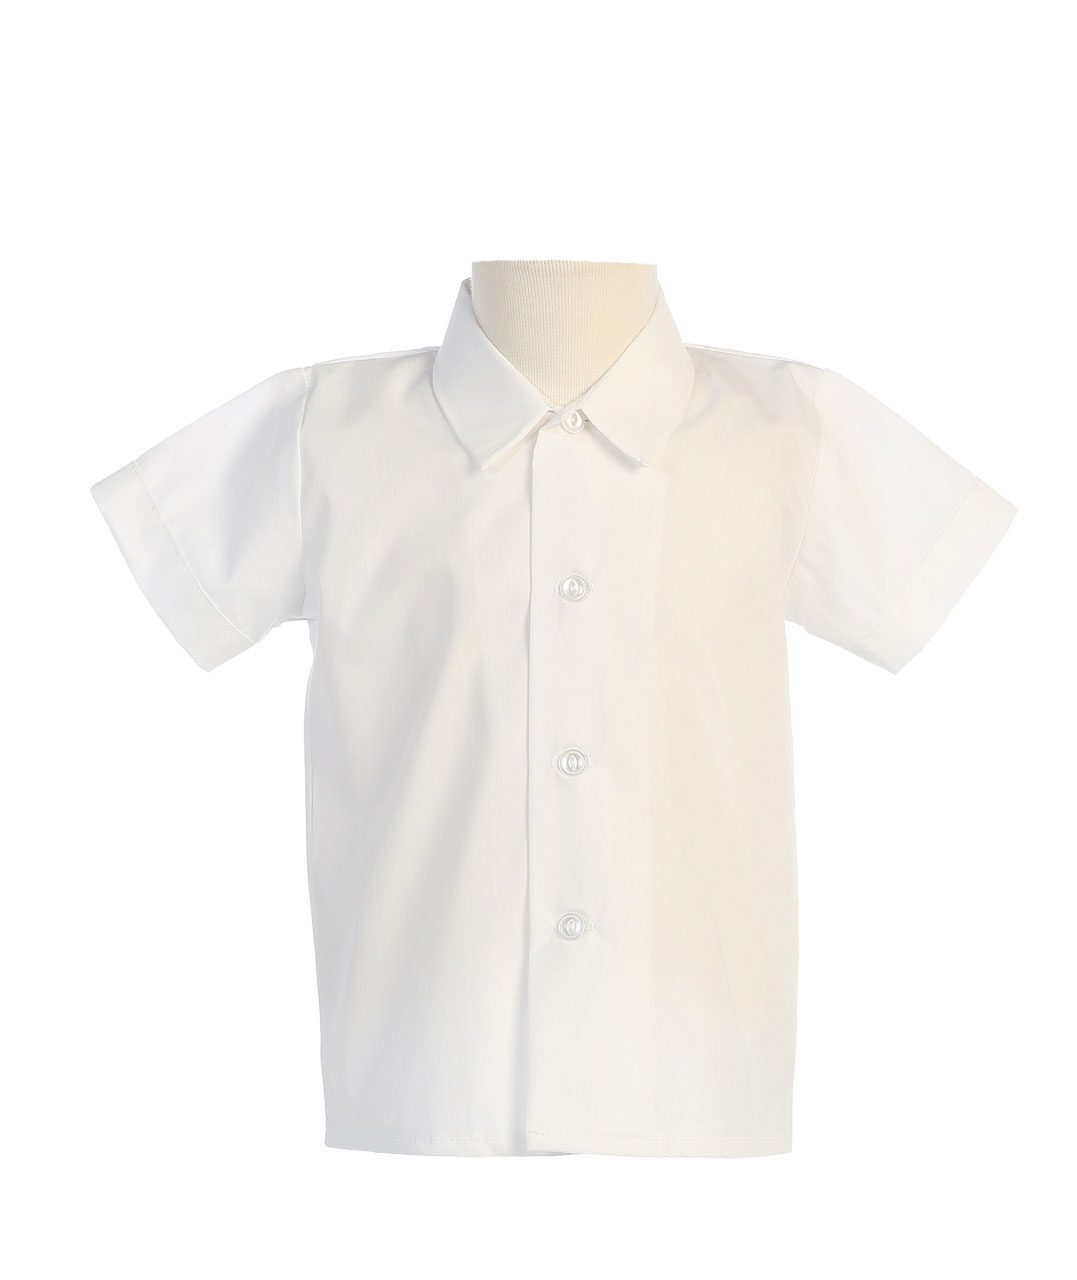 Boys Short Sleeved Simple Dress Shirt - Available in White 3T